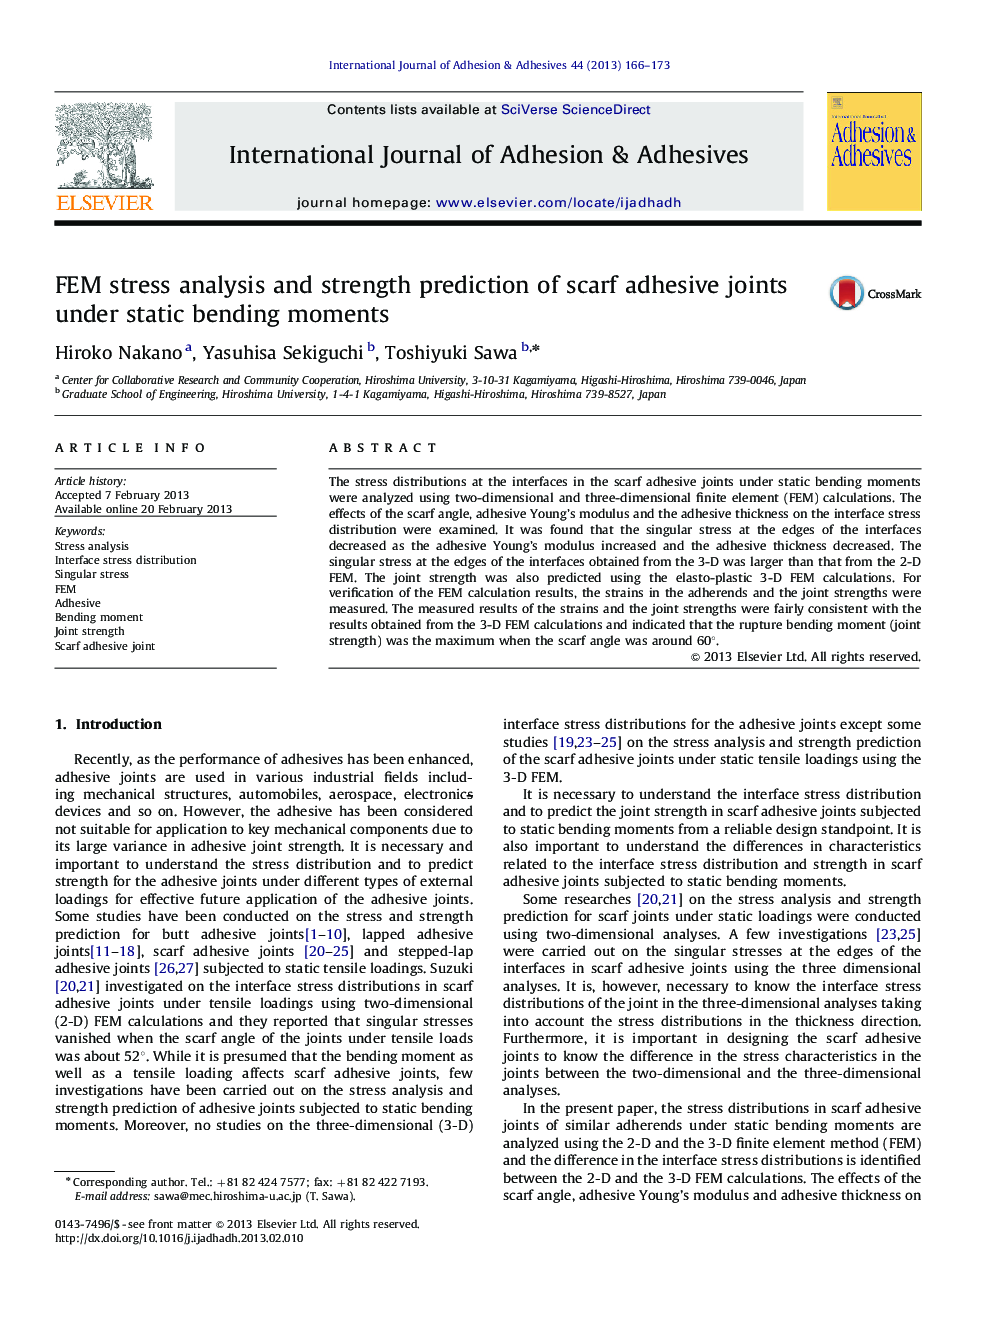 FEM stress analysis and strength prediction of scarf adhesive joints under static bending moments